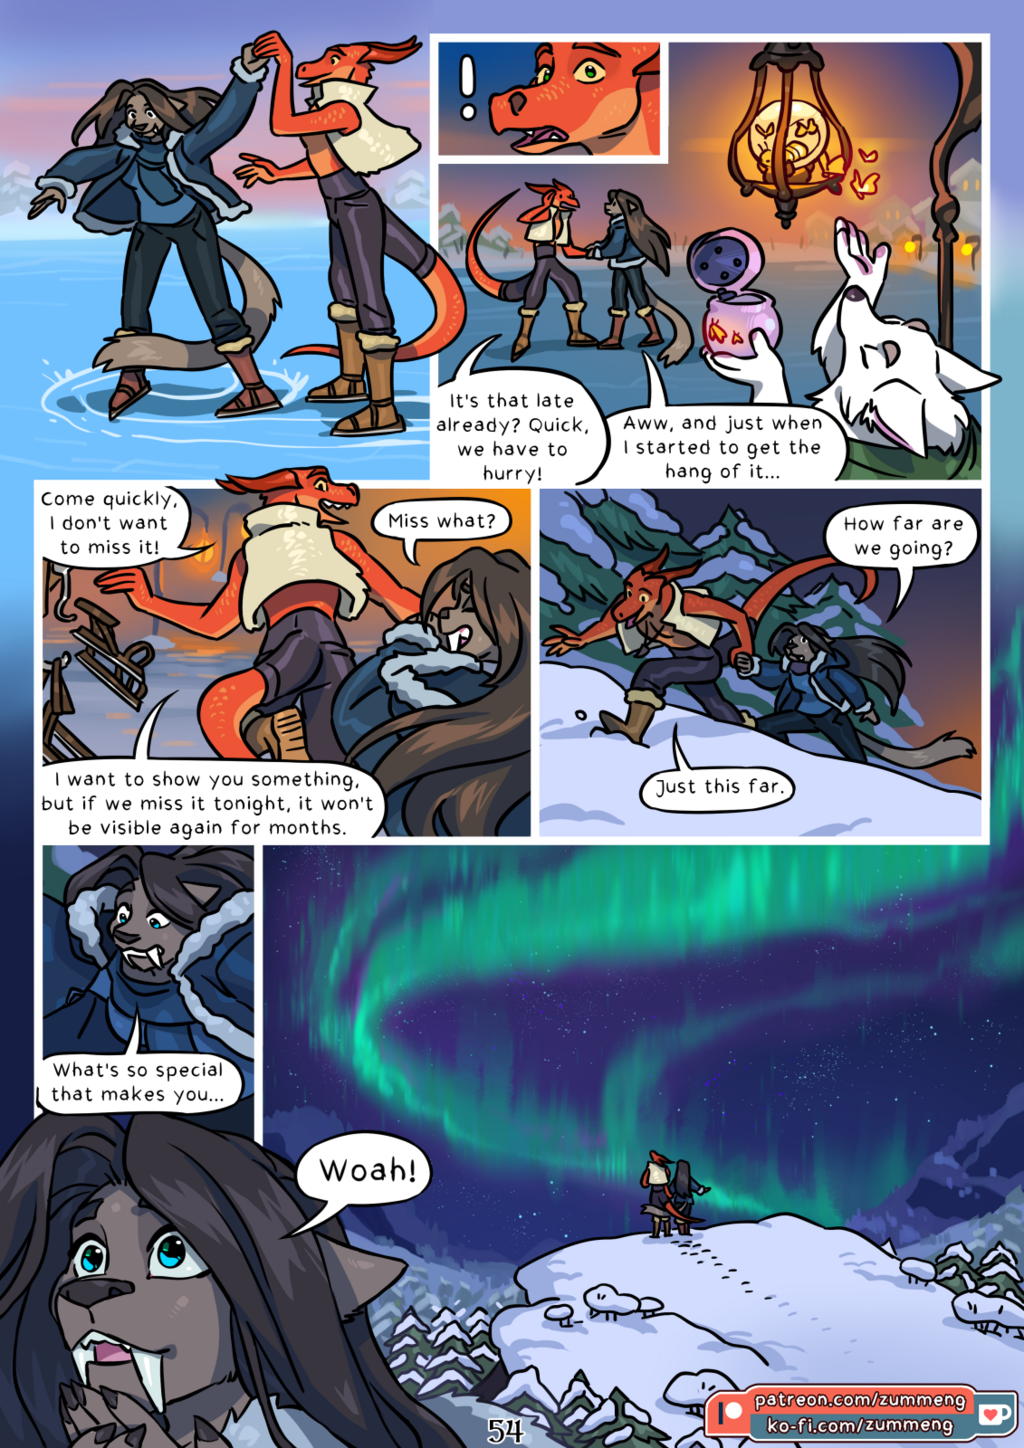 Wishes 3 pg. 54.